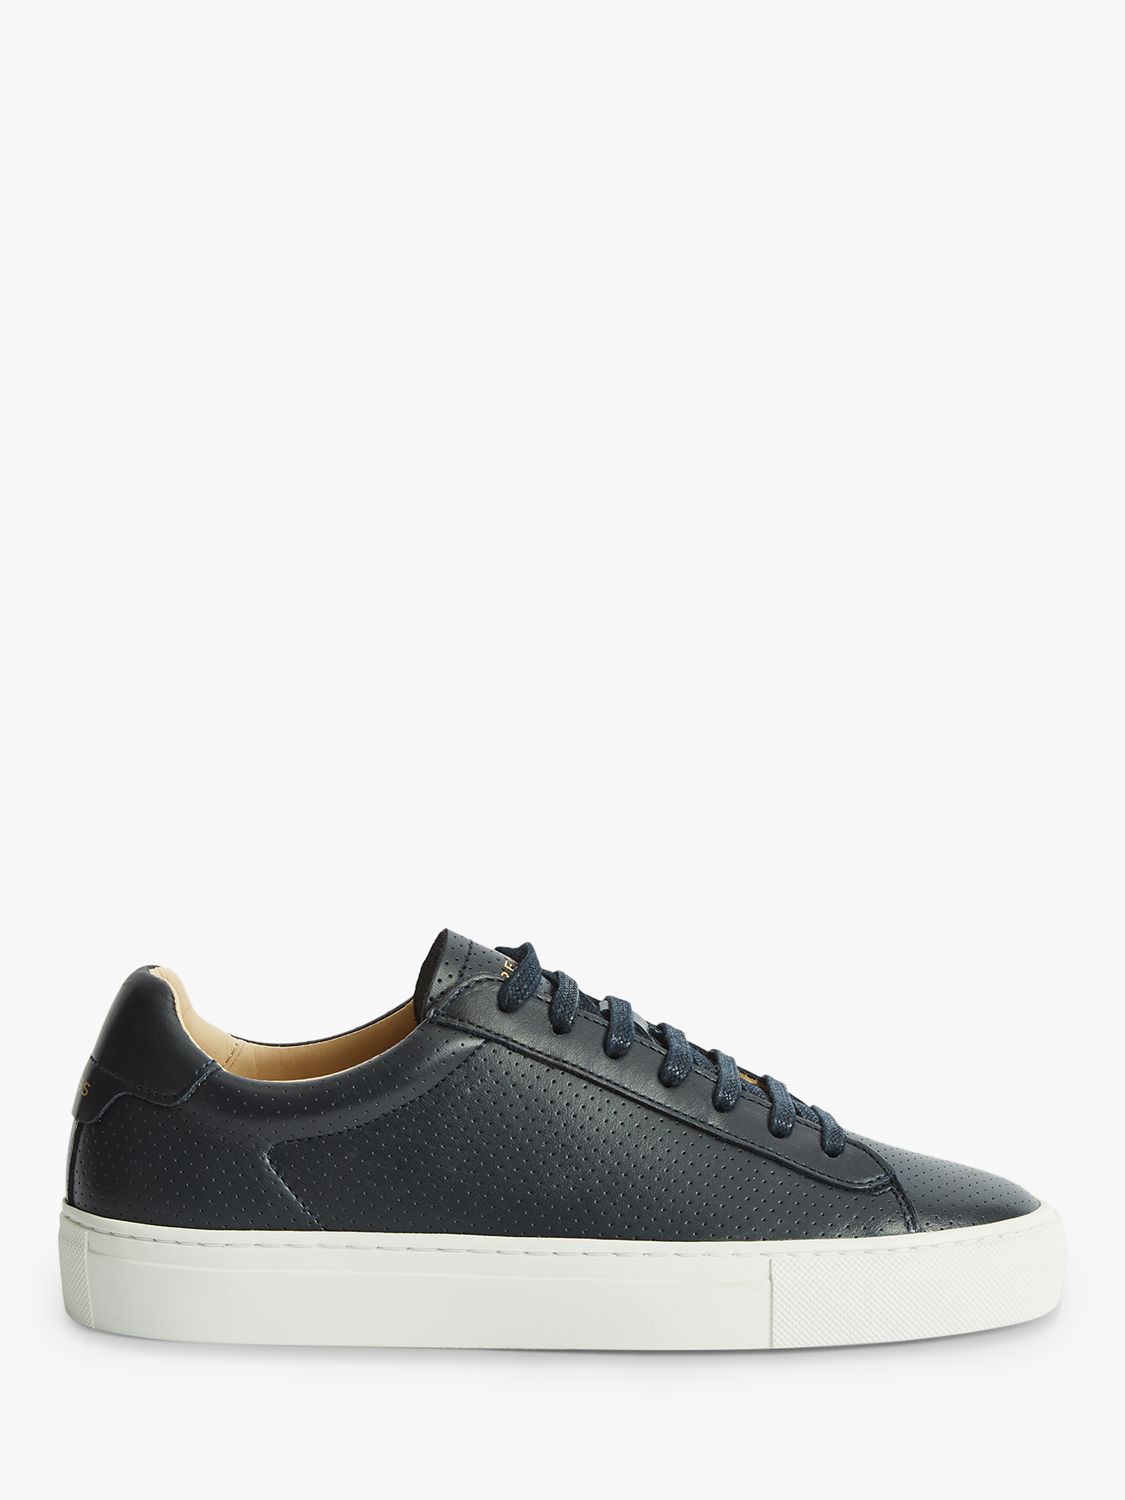 Reiss Finley Leather Perforated Trainers, Navy at John Lewis & Partners